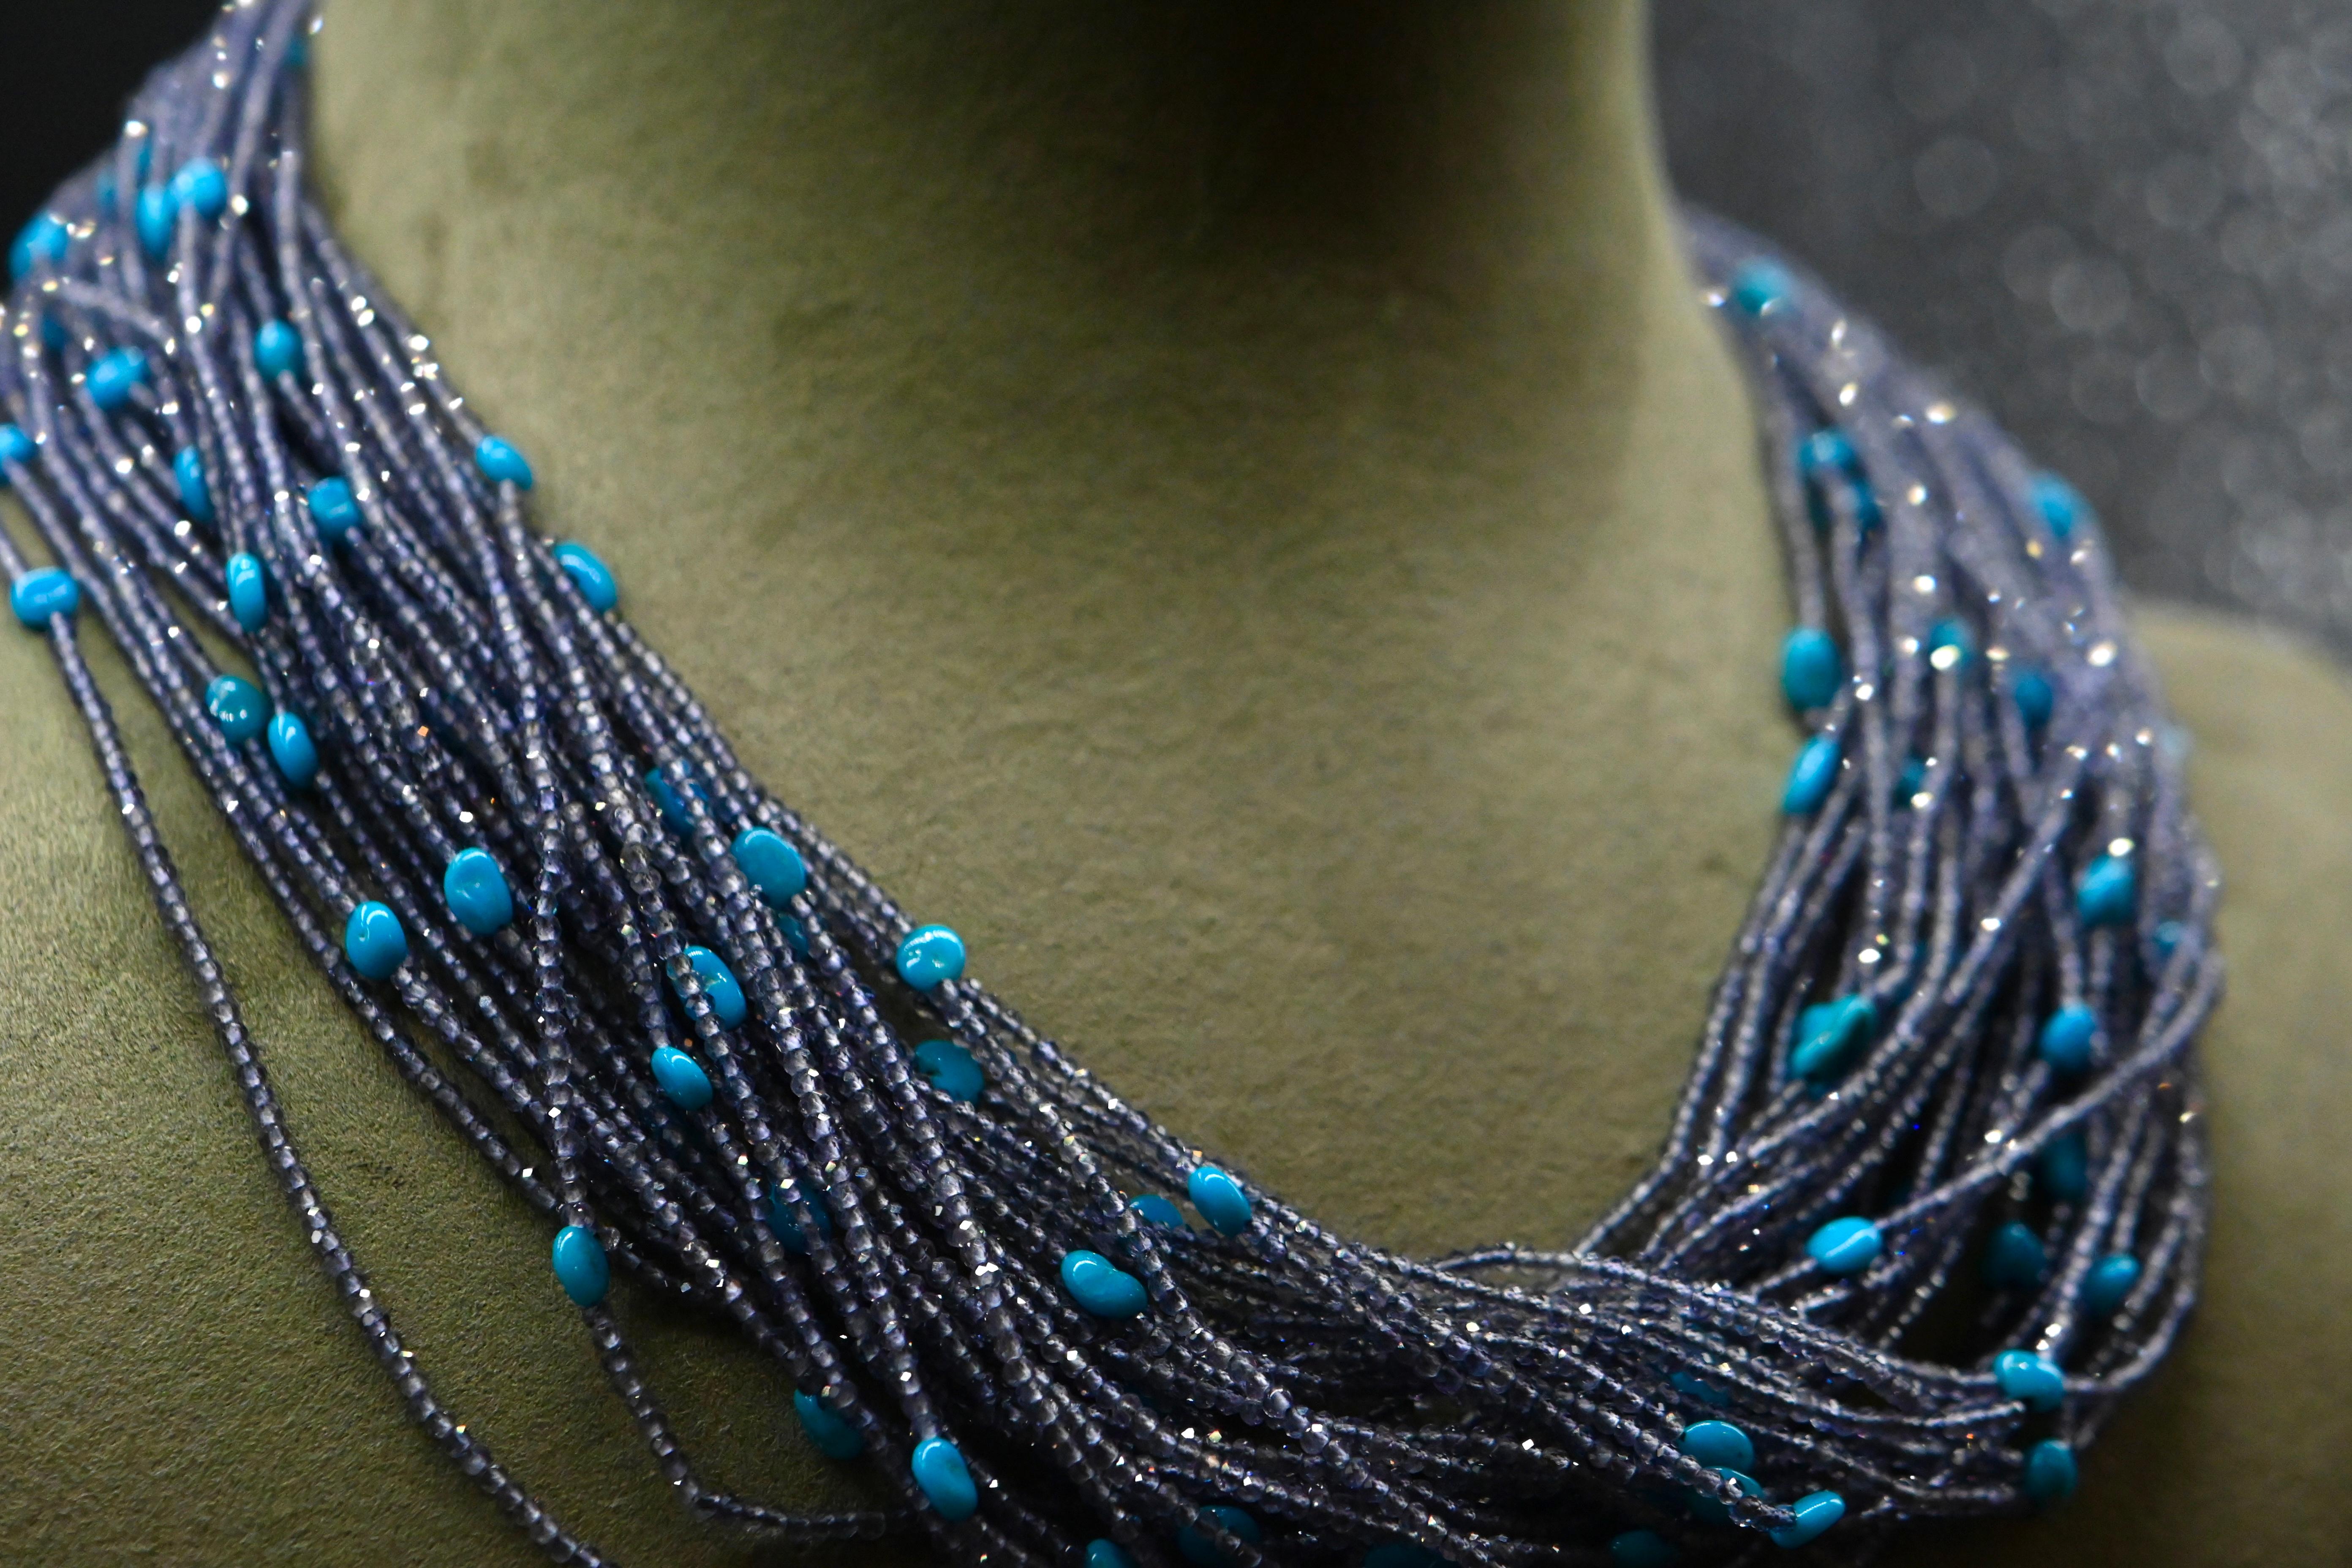 Bewitchingly beautiful, Turquoise gemstones have been prized for millennia for their distinctive blue-green color. Their association with elements of nature and ancient cultures lends this necklace a mystical aura and a touch of the exotic. Each